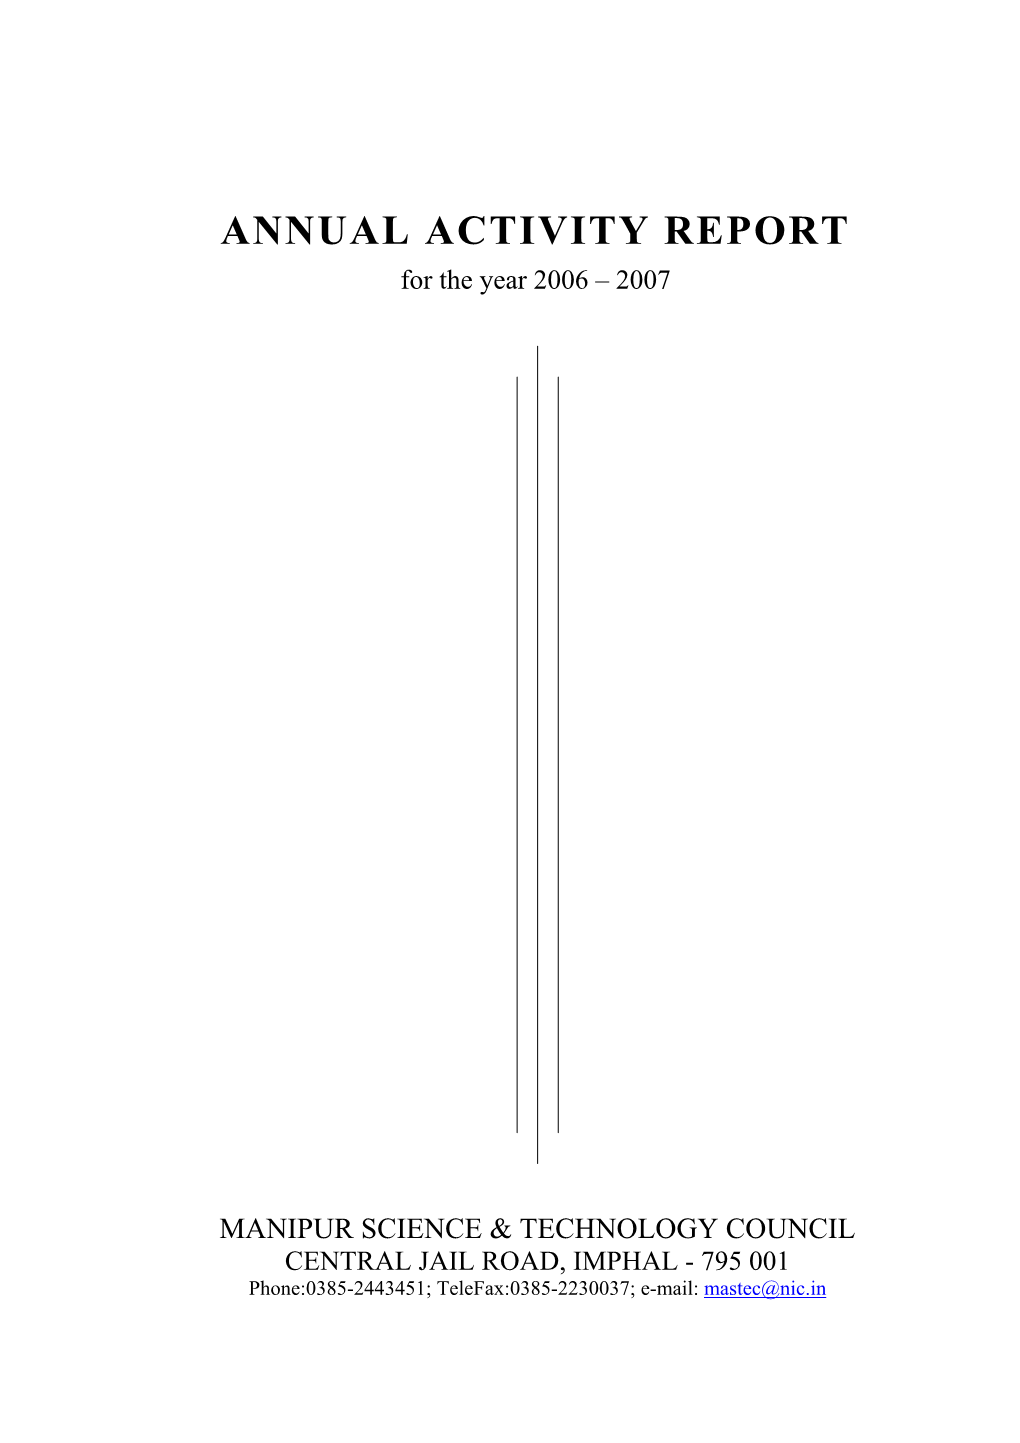 ANNUAL ACTIVITY REPORT for the Year 2006 – 2007